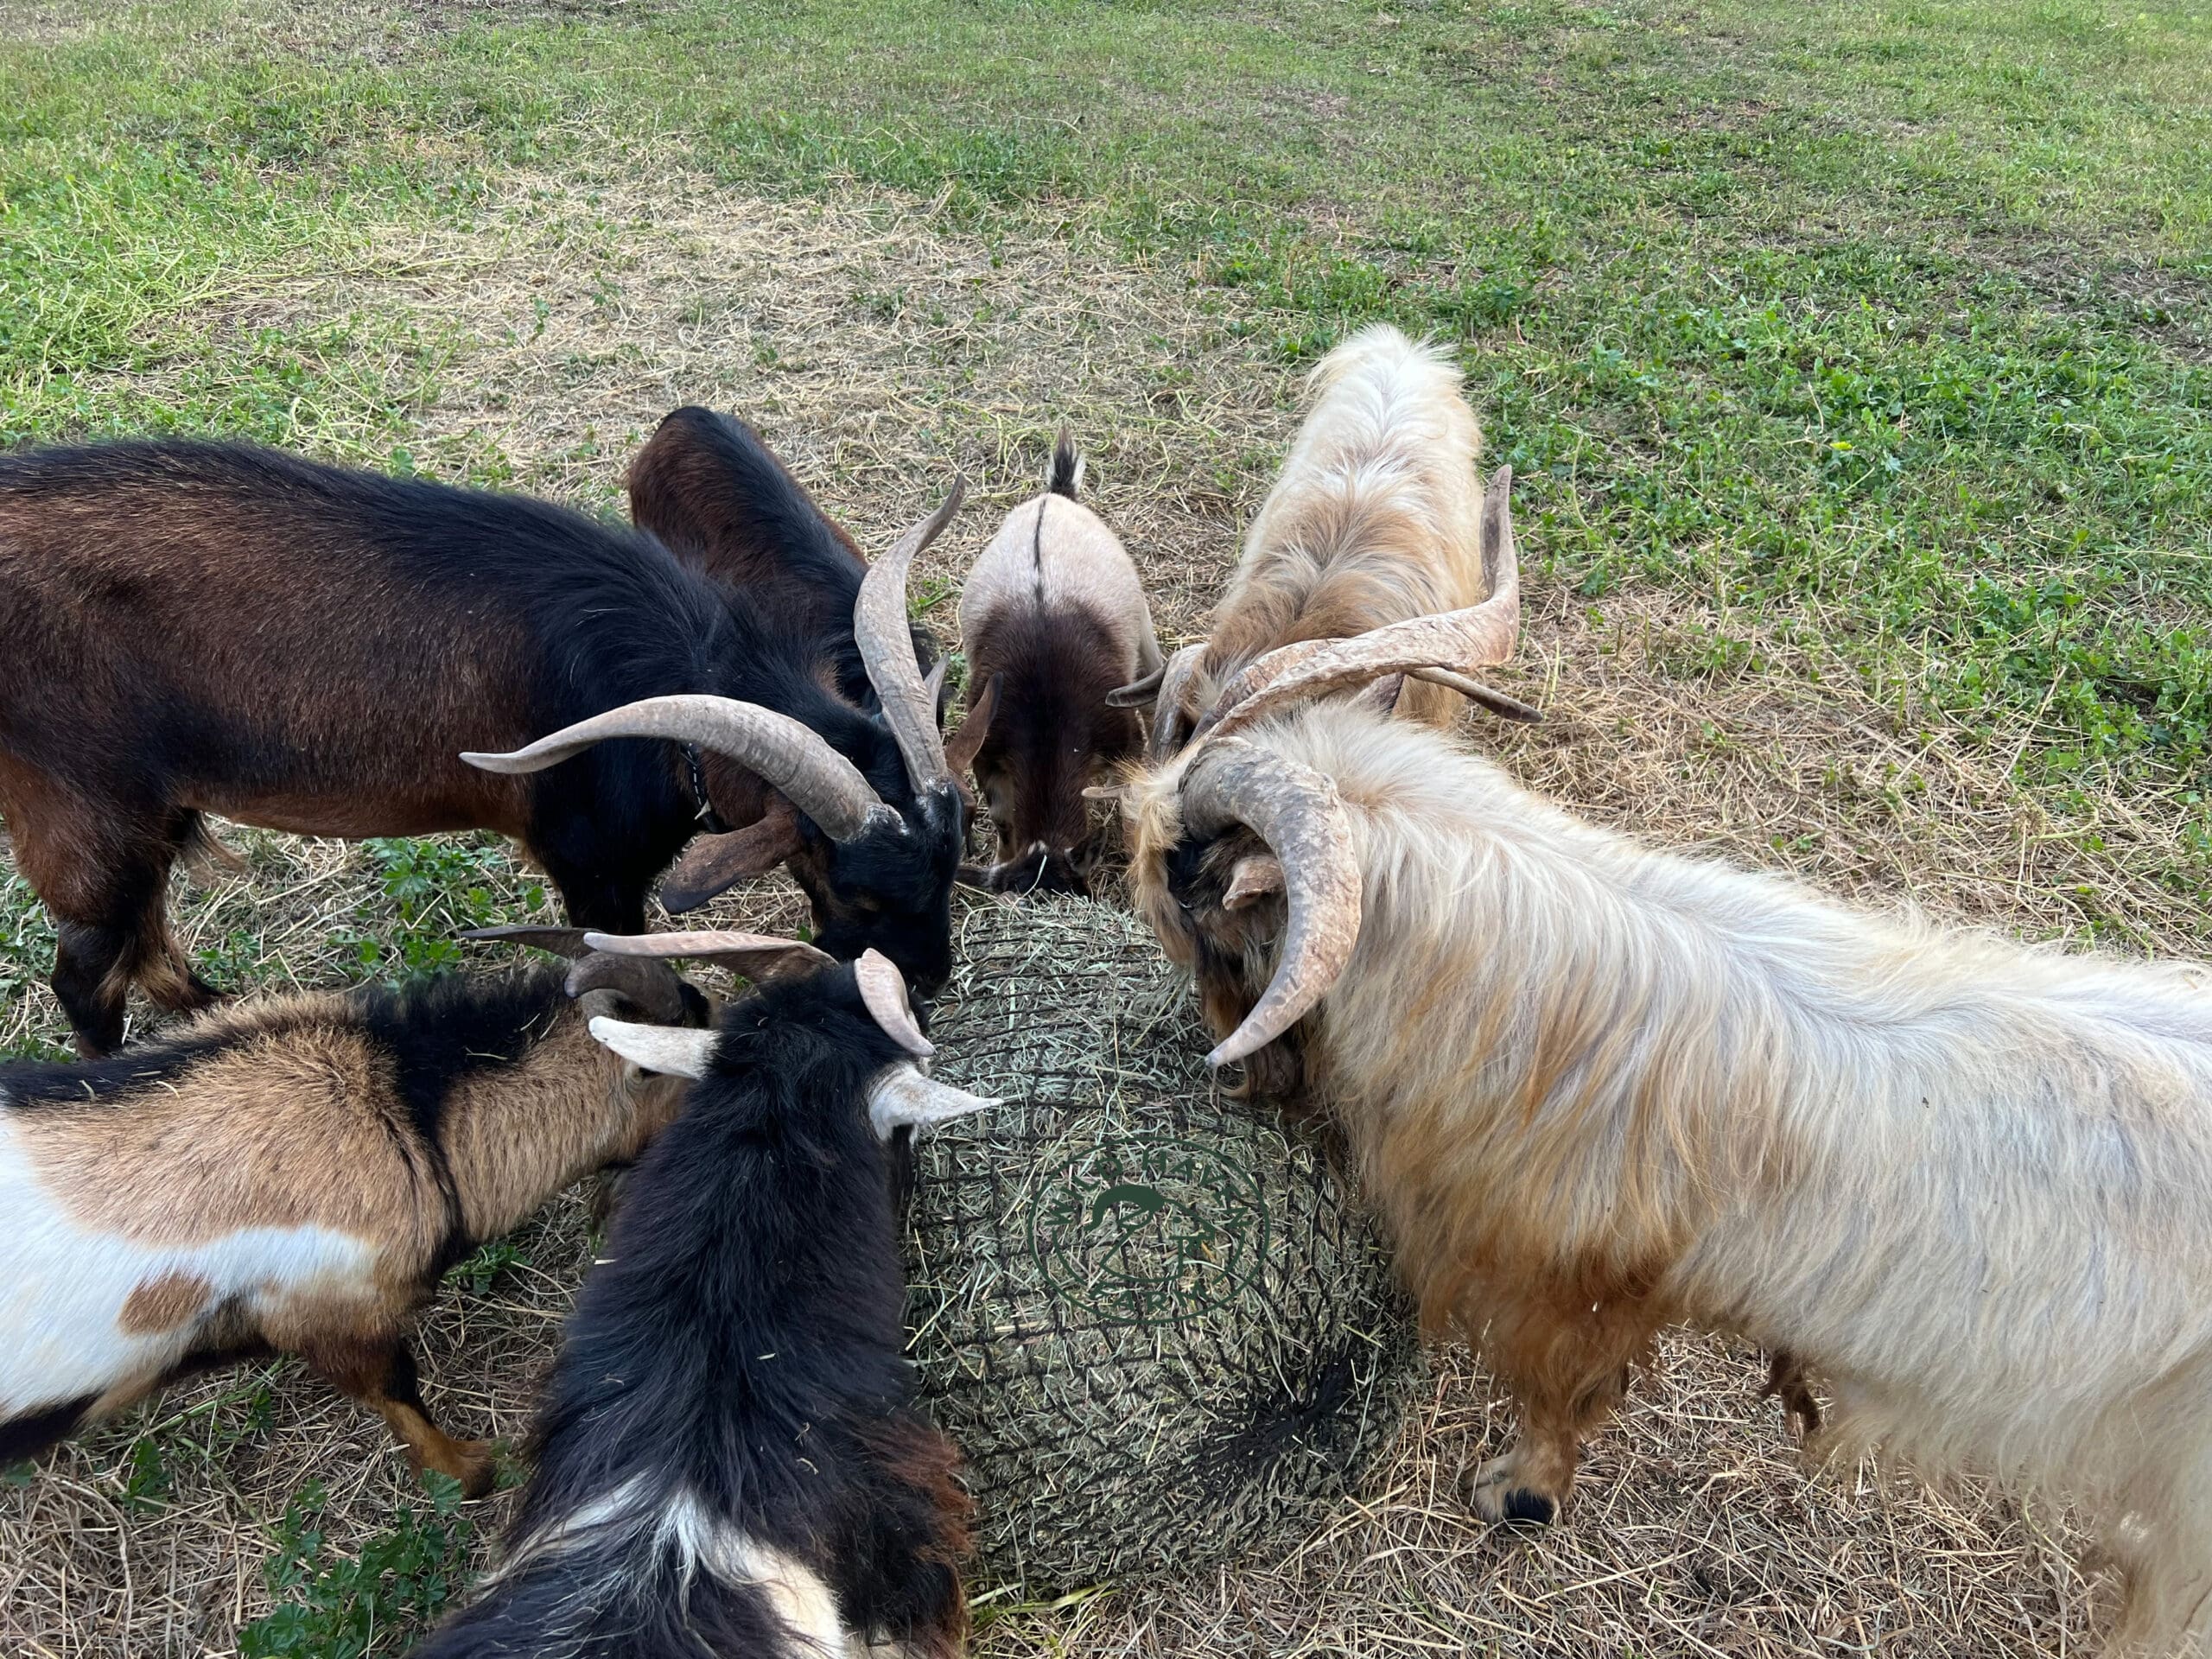 Goats eating in a circle around a bale of hay